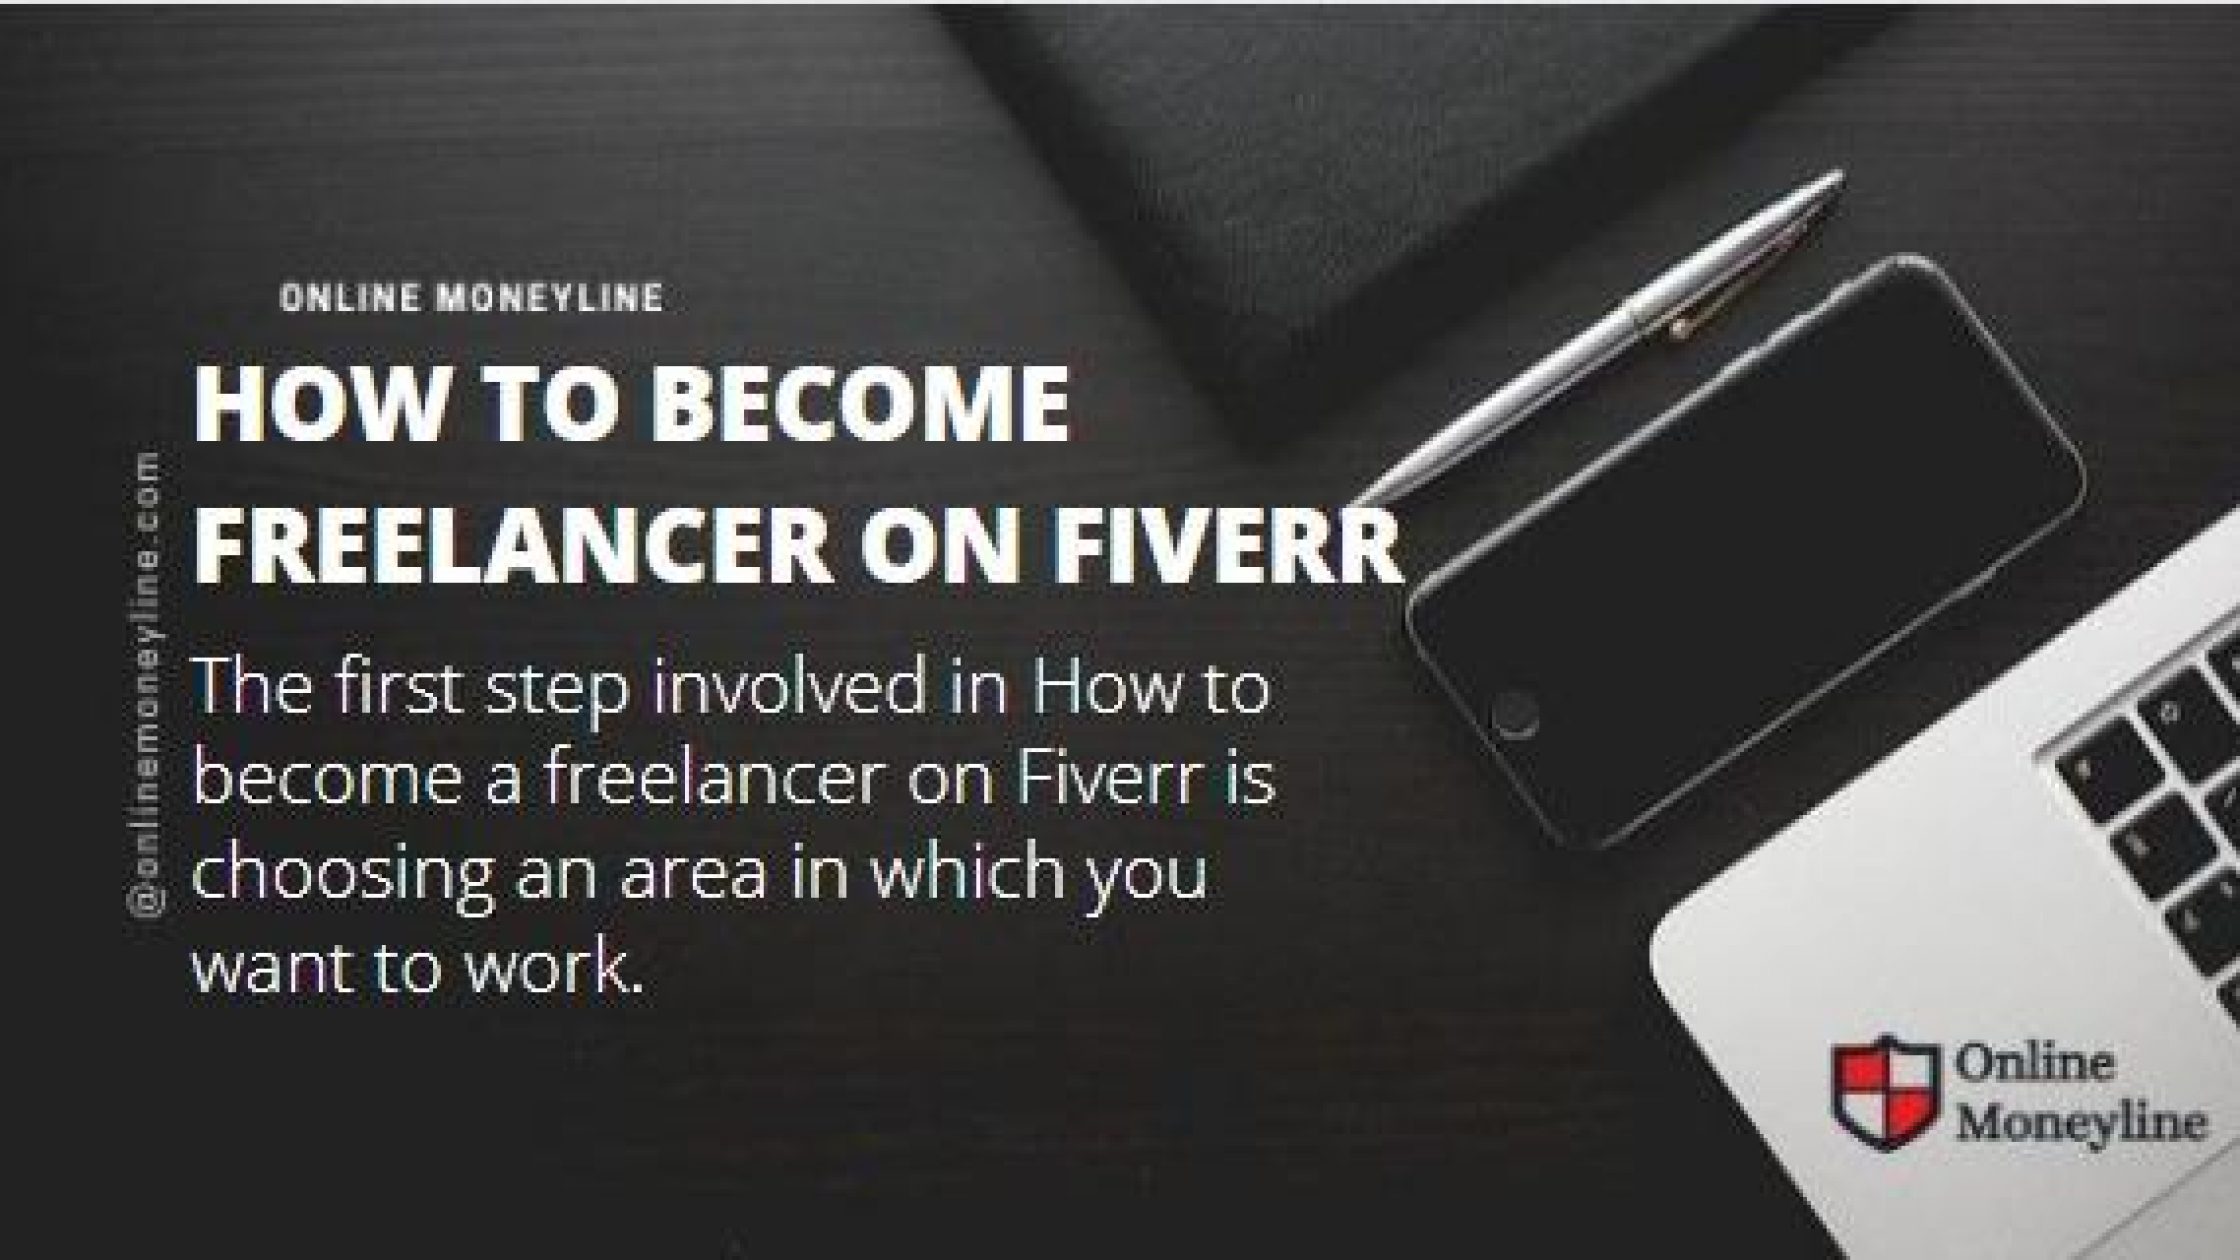 How to become freelancer on Fiverr